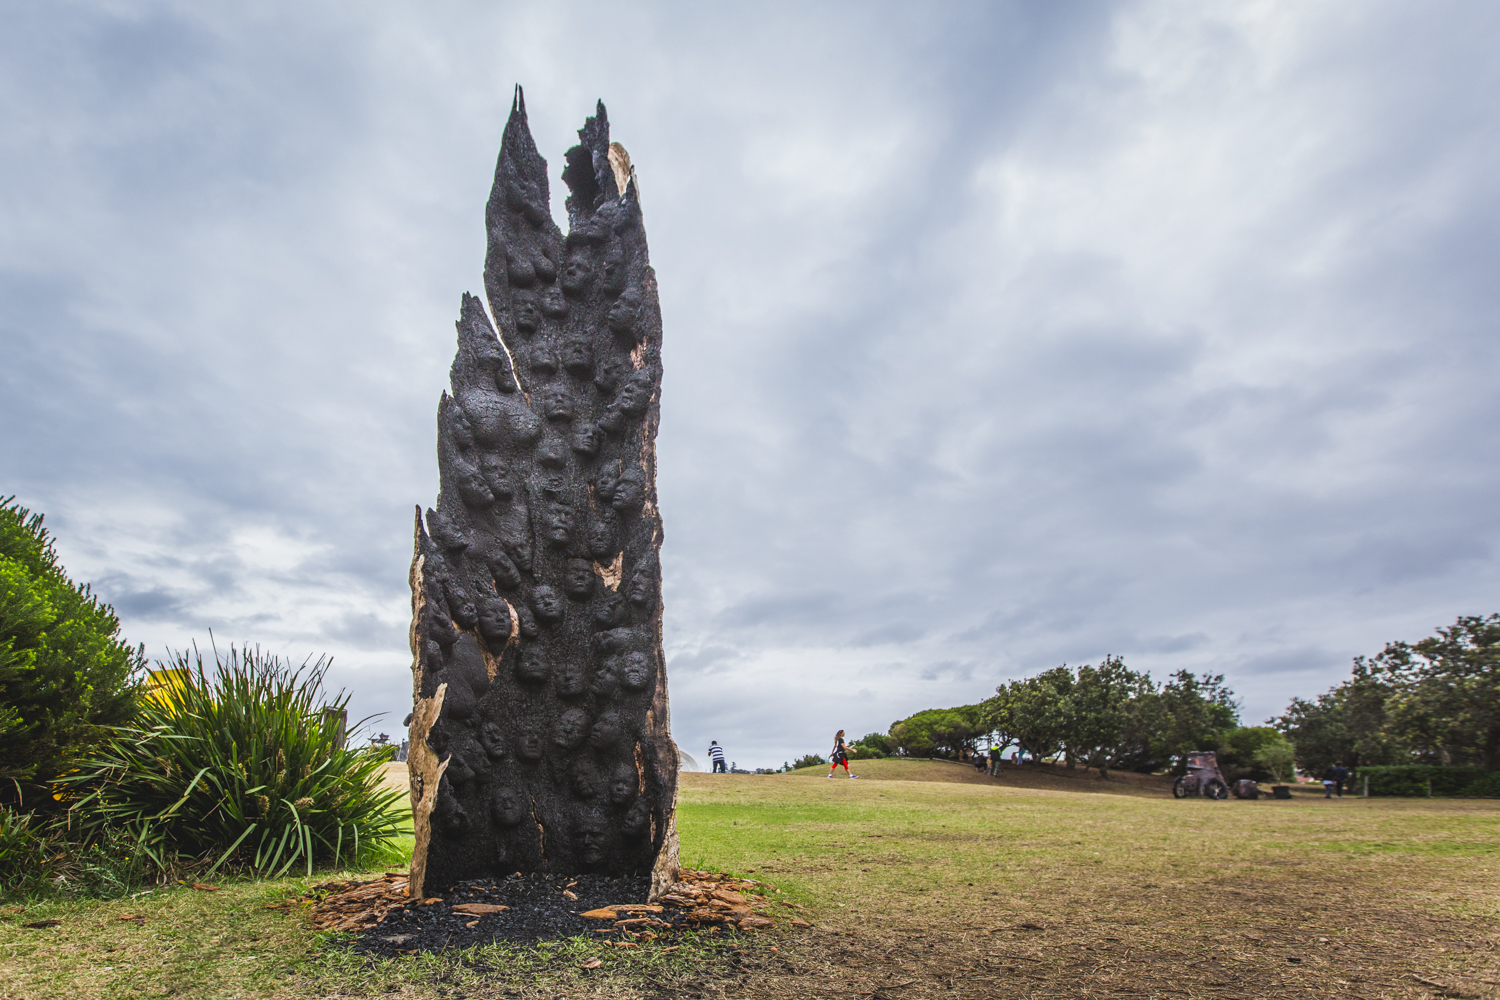 Kim Perrier, ashes to ashes, Sculpture by the Sea, Bondi 2015. Photo Jessica Wyld